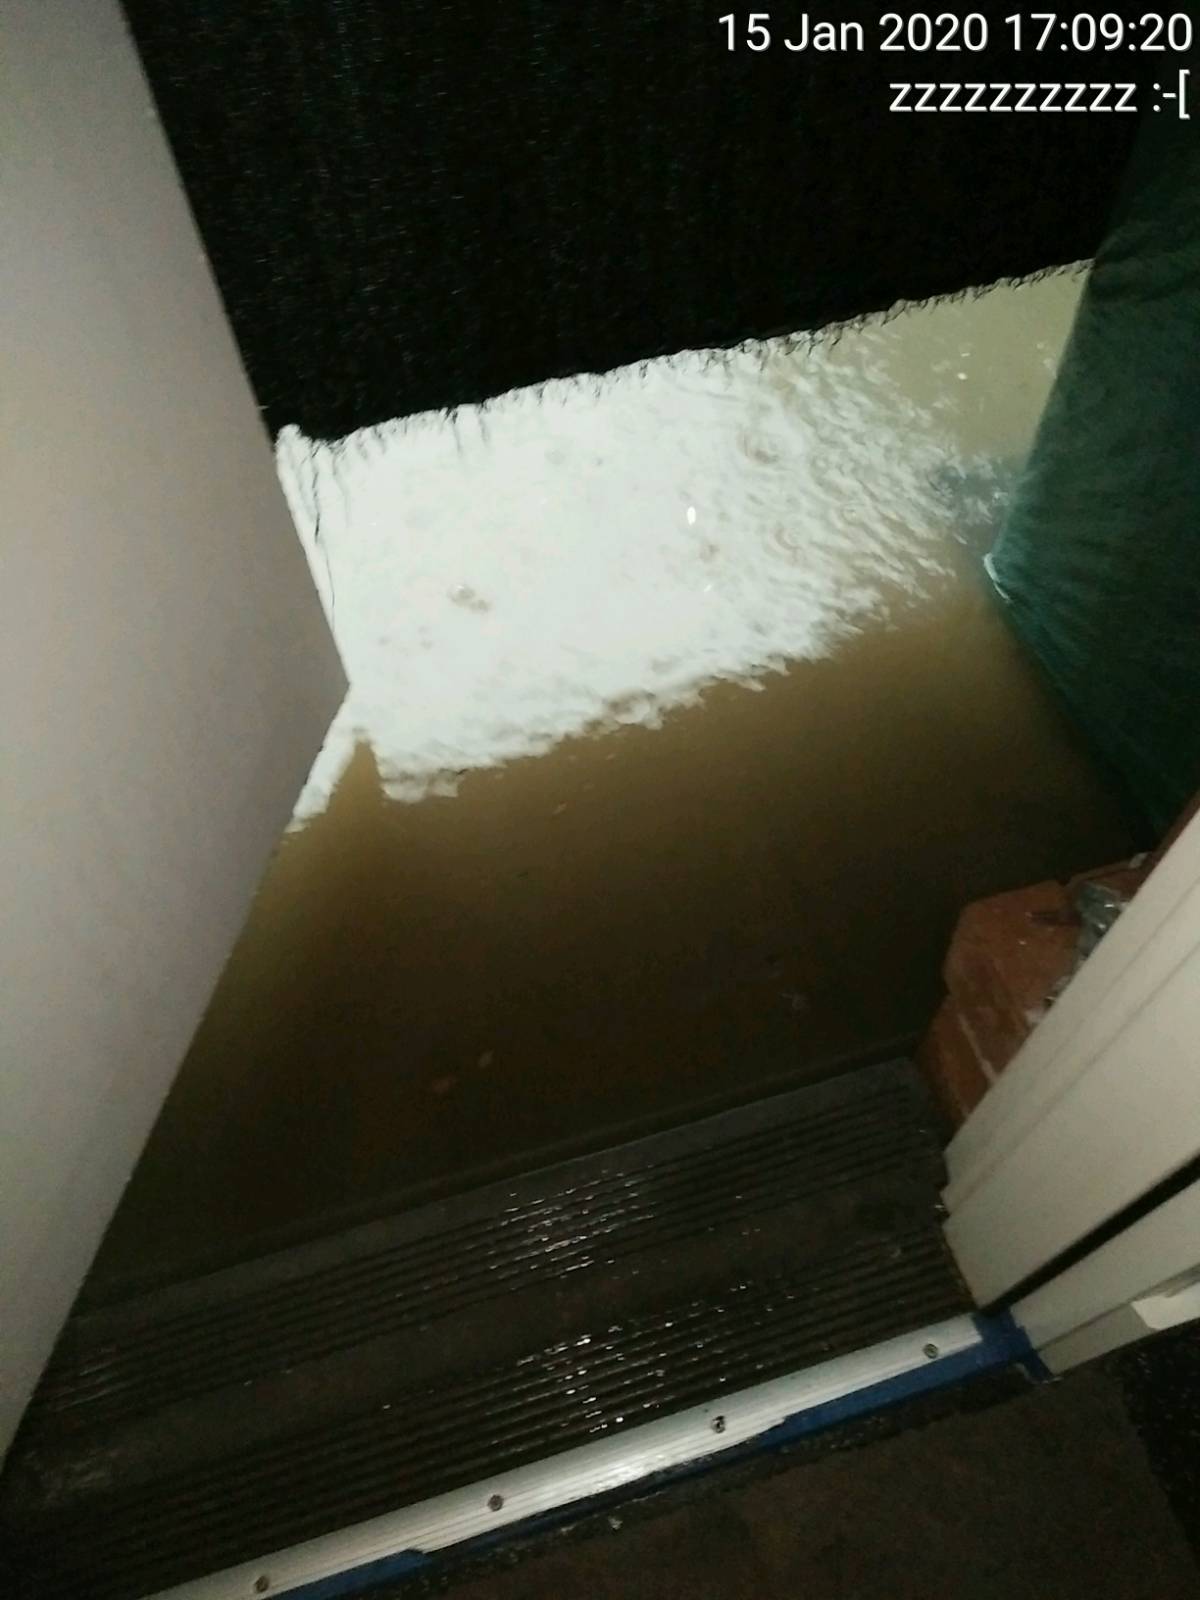 Doors during flood event